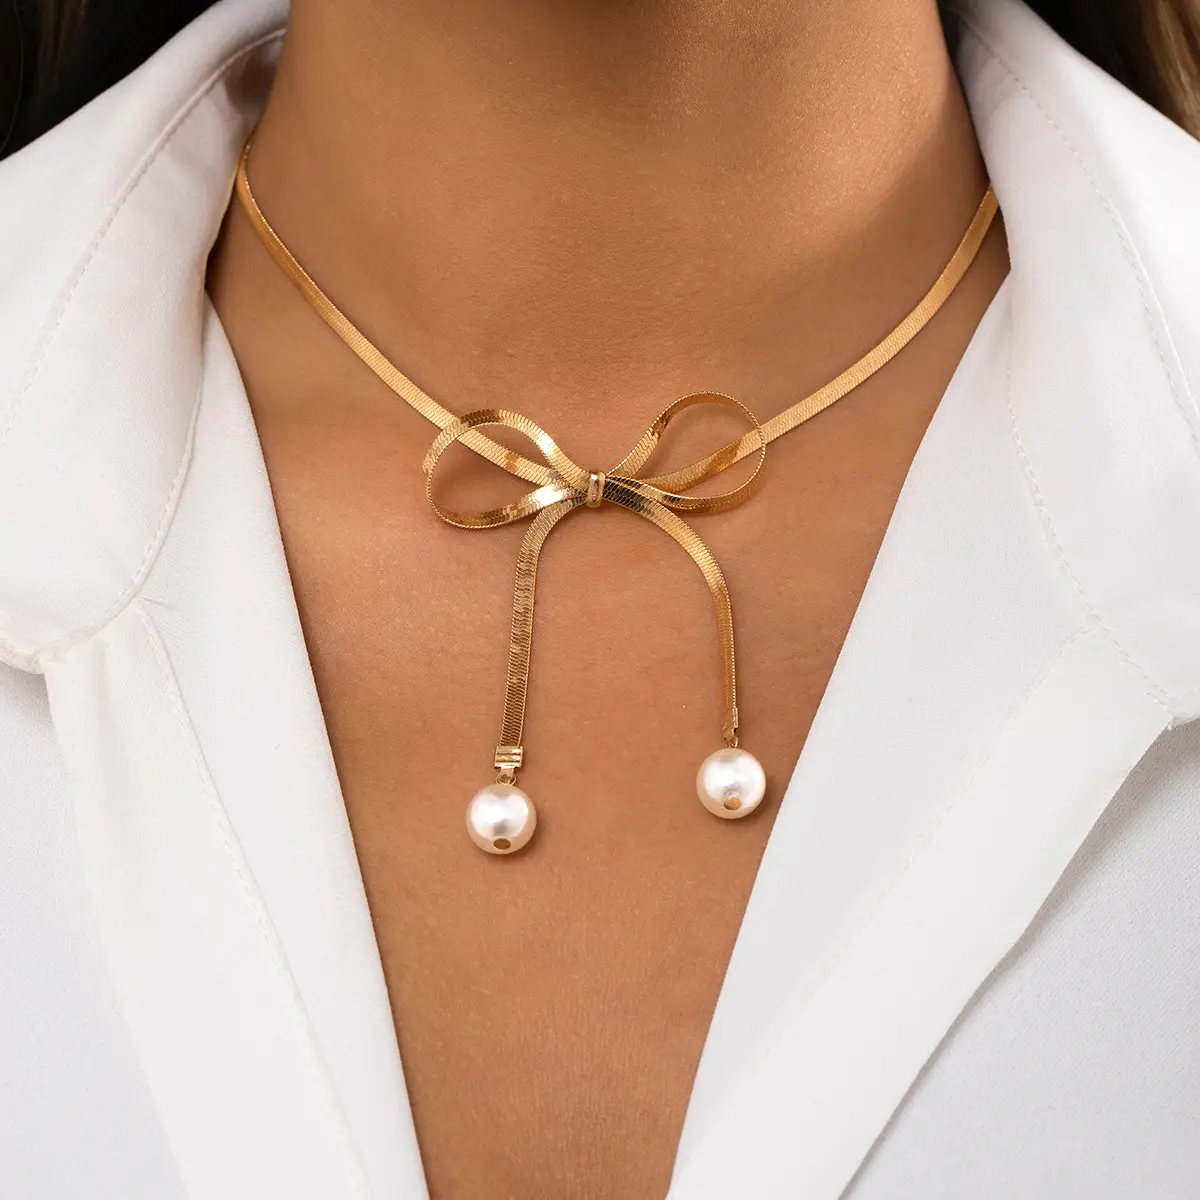 YW High Quality Metal Snake Bone Chain Bow Knot Clavicle Chain Imitation Pearl Women Jewellery Gold Necklace